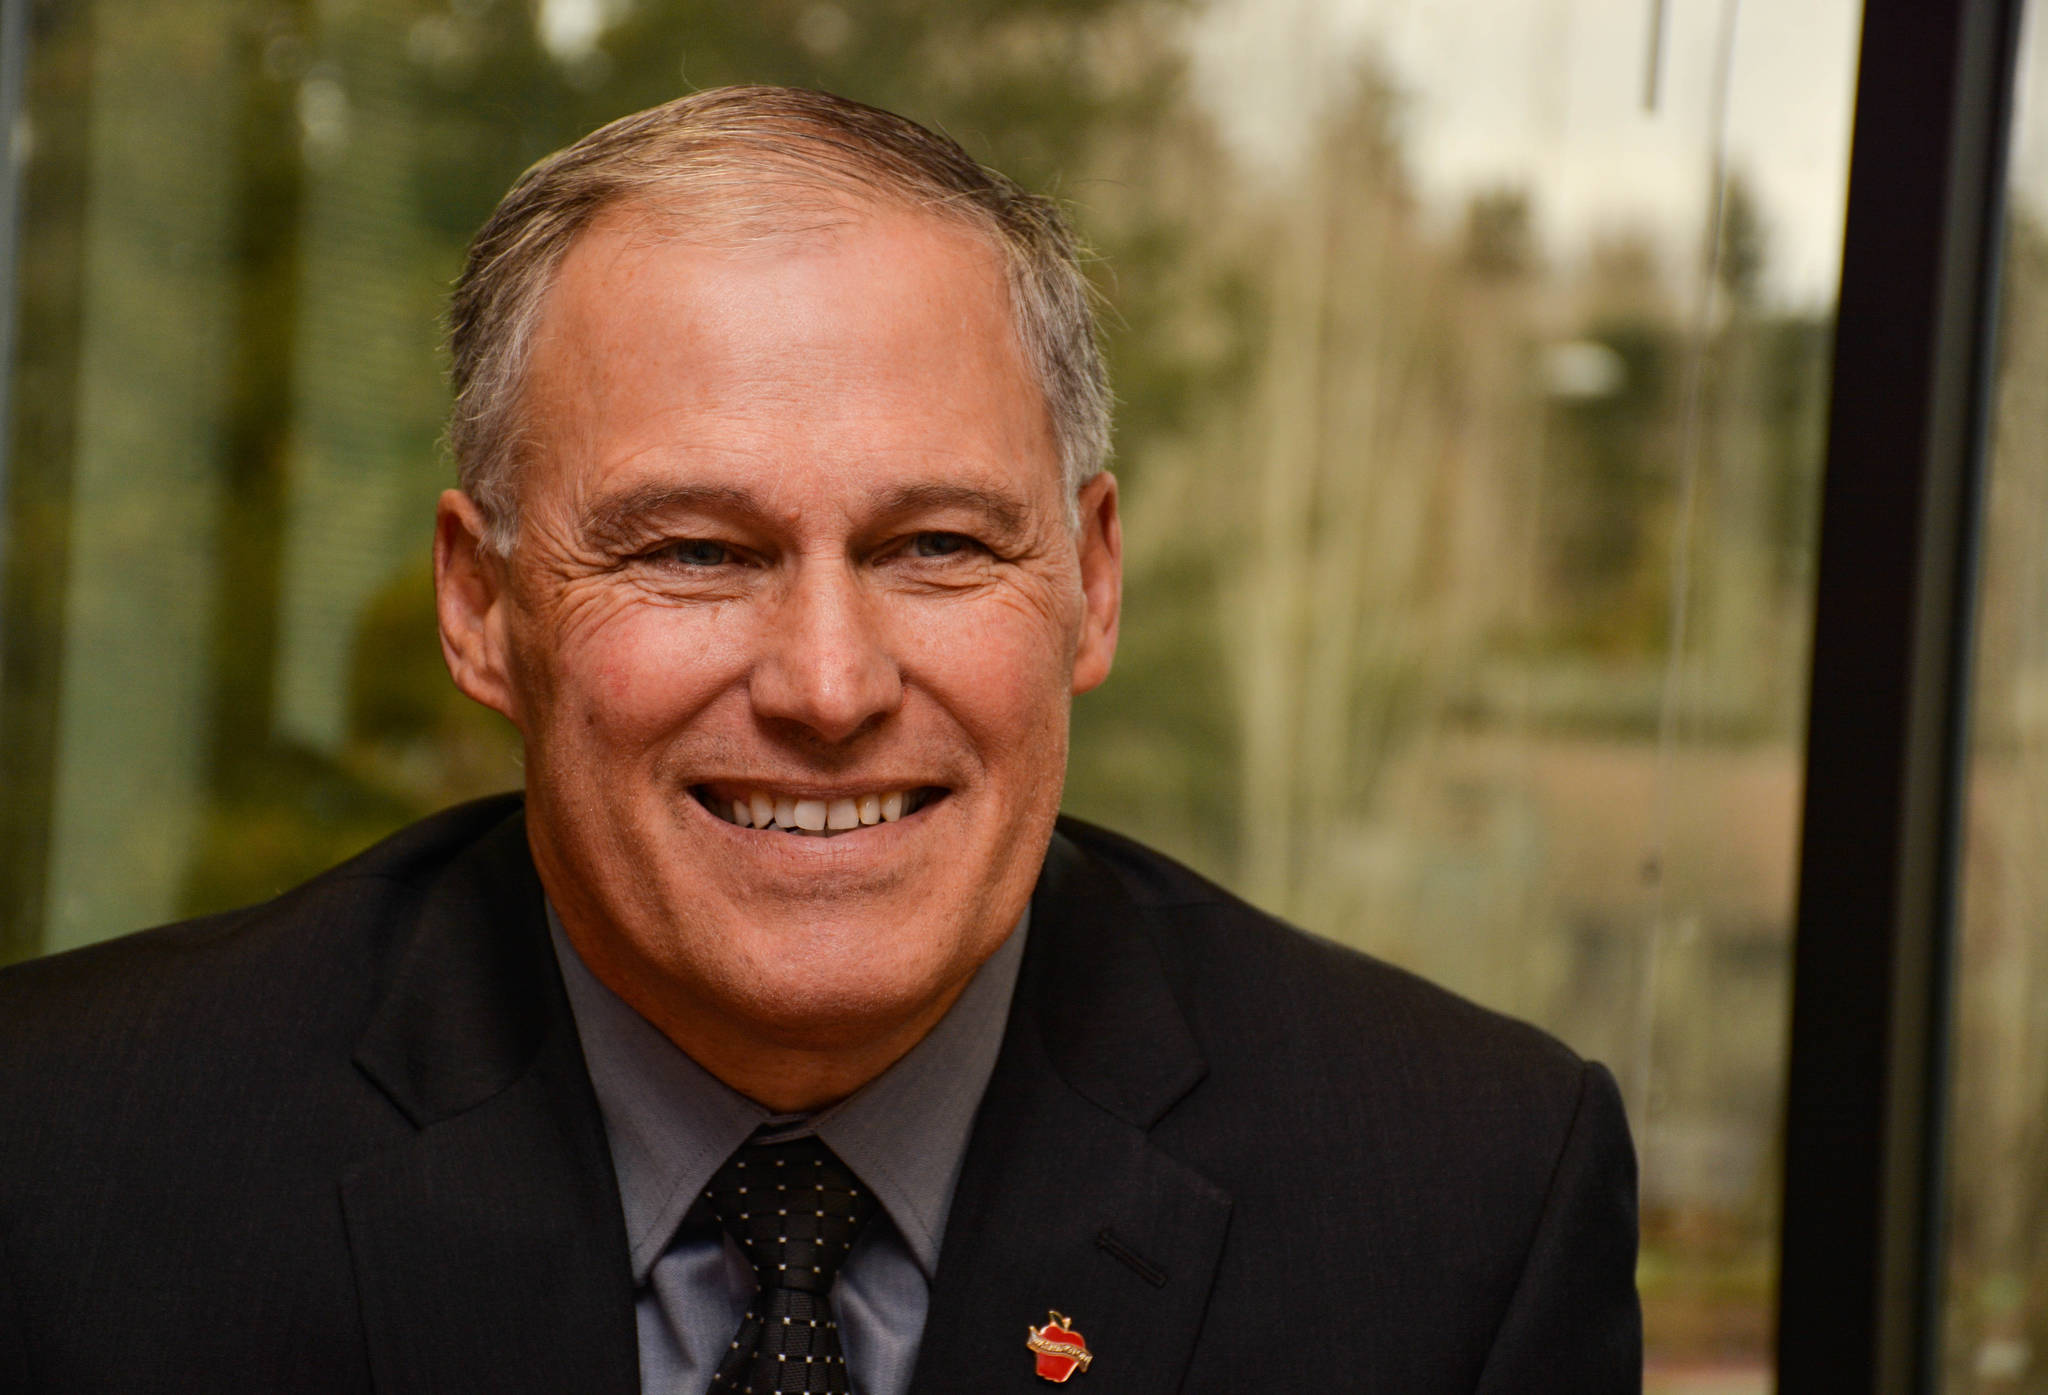 Gov. Jay Inslee’s standout moments from Democratic debate